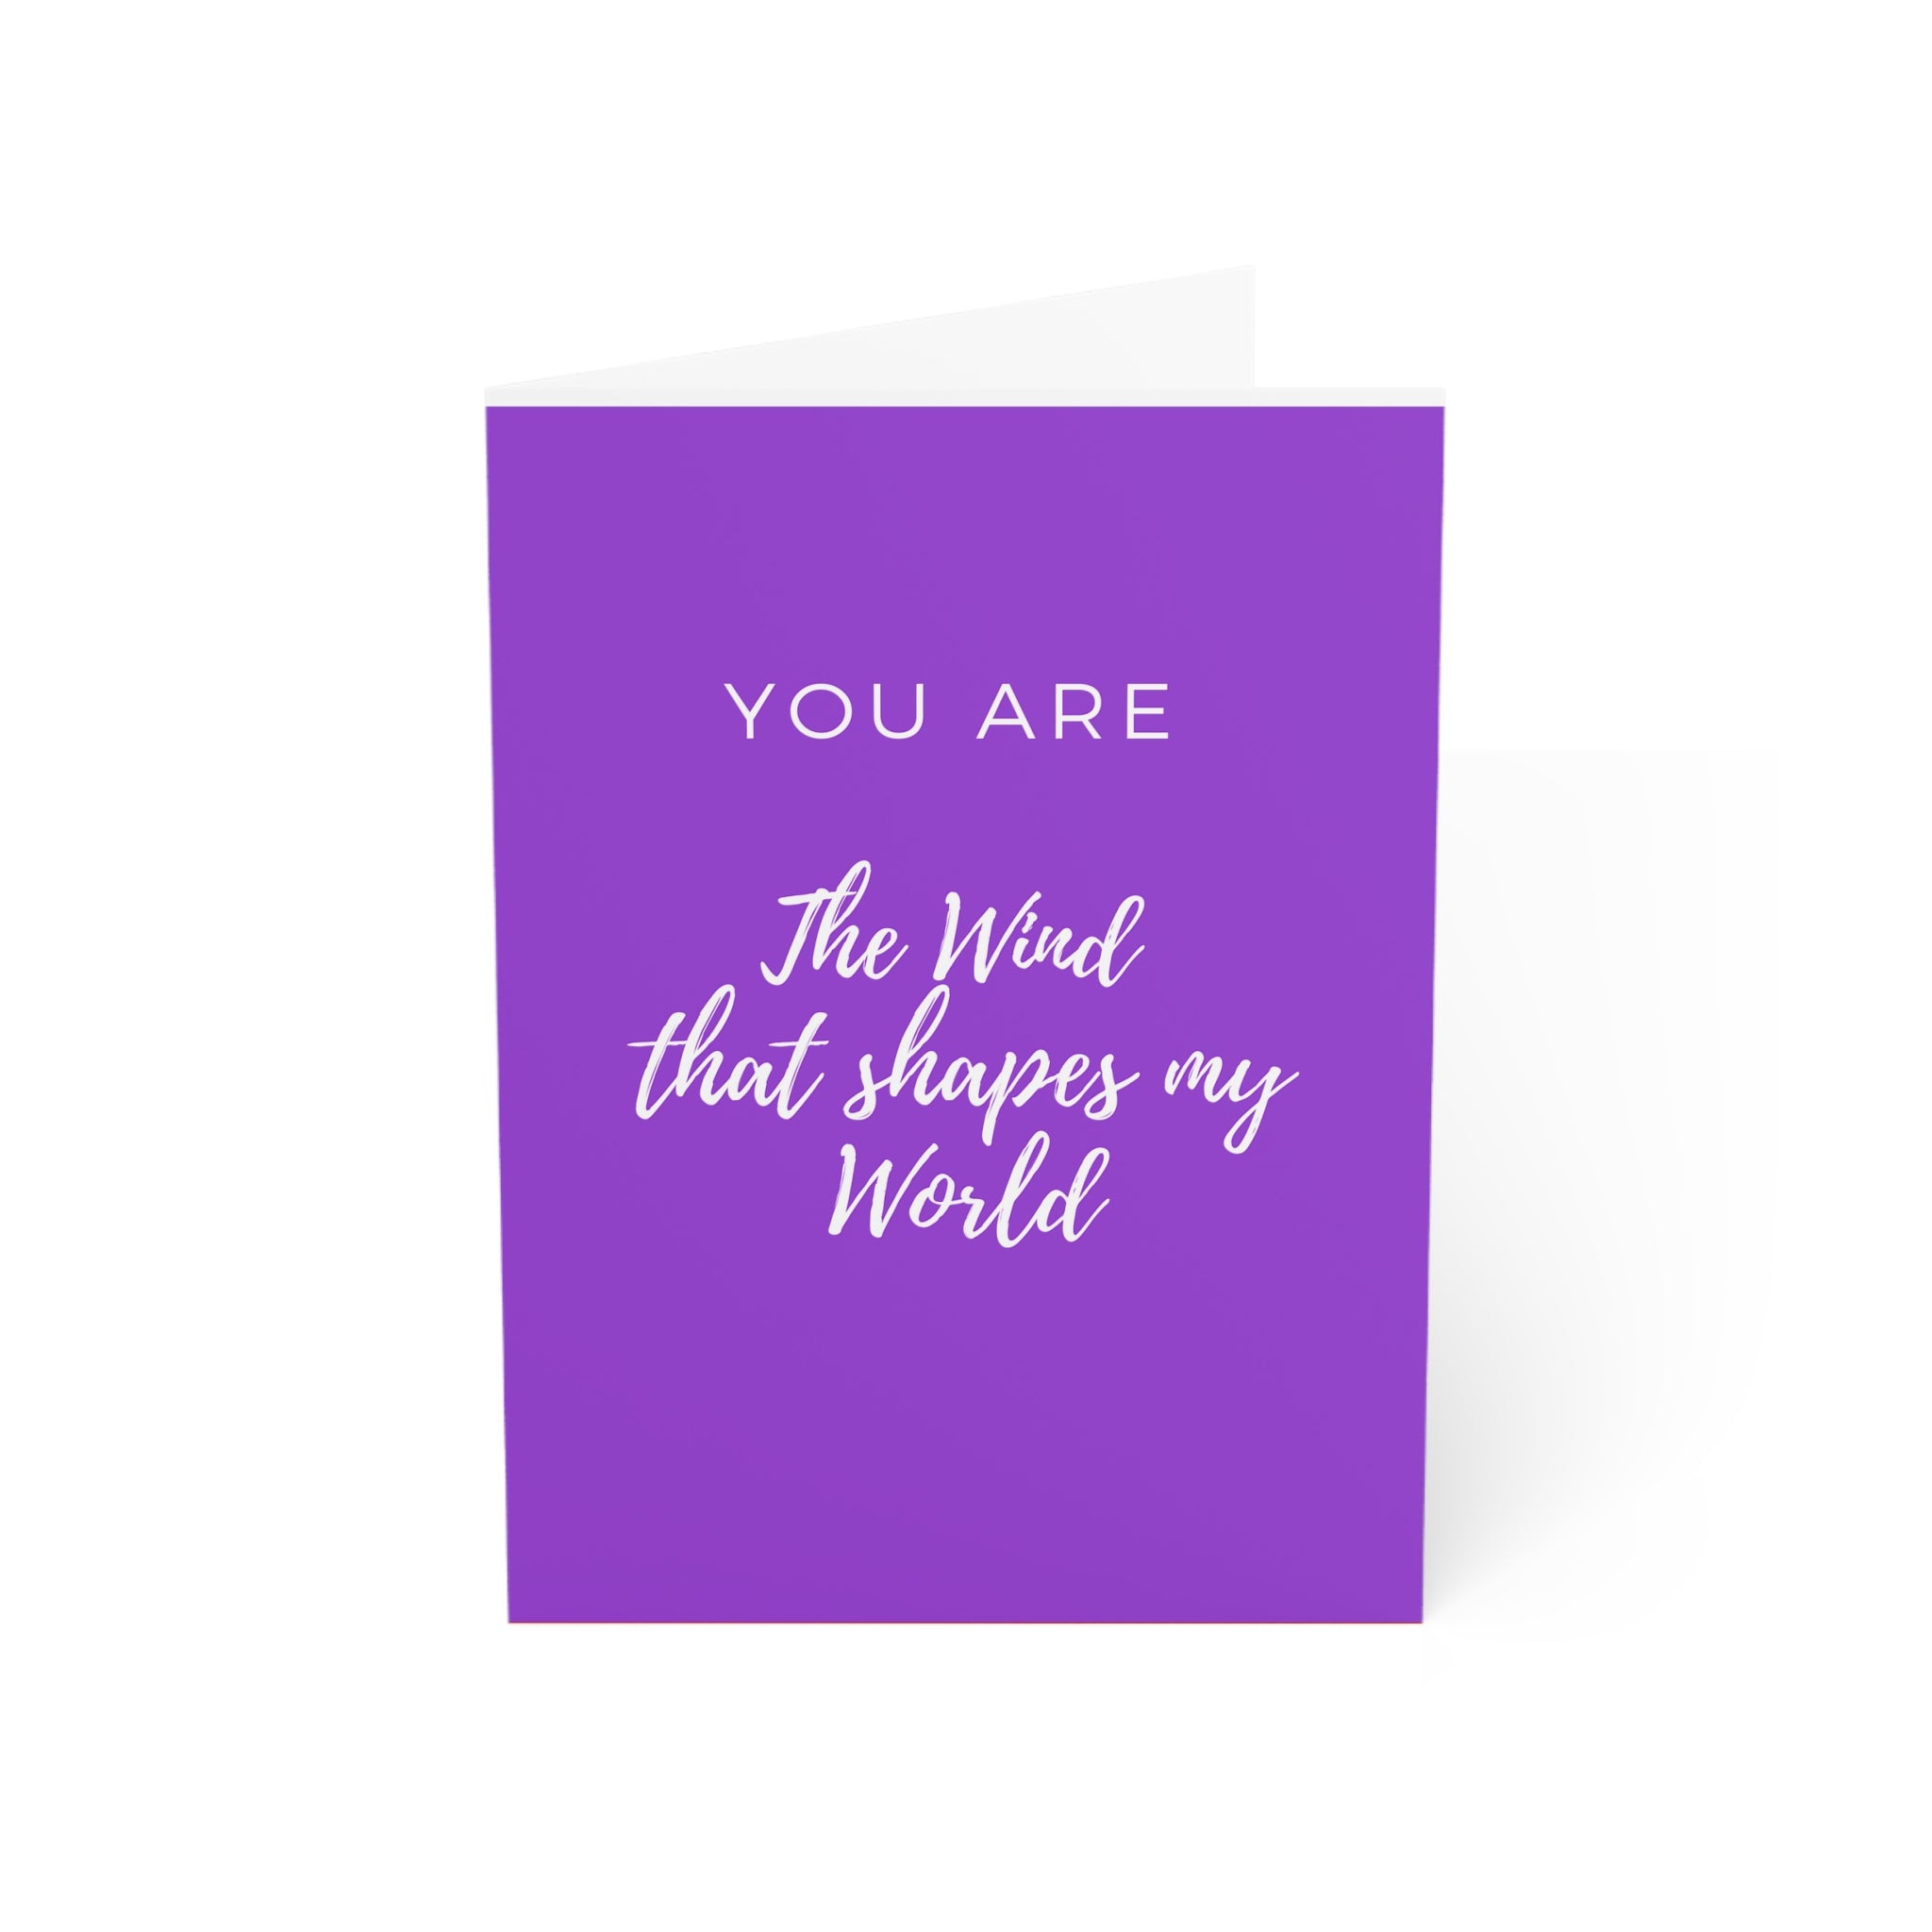 Greeting Cards (Violet Cover)  You are the wind that shapes my world